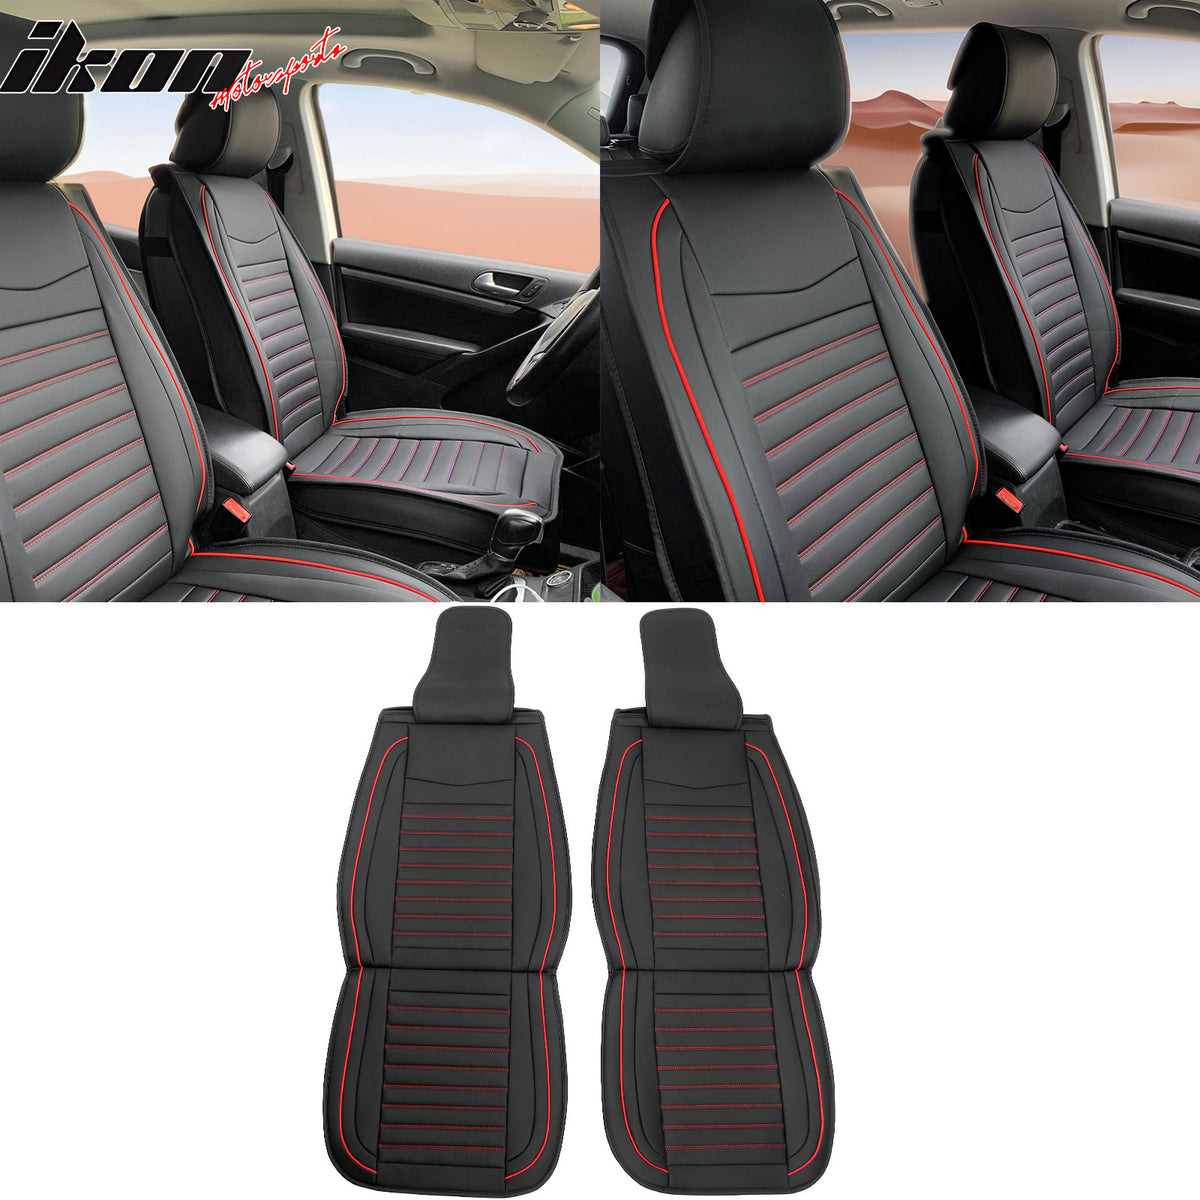 Universal Car Seat Covers PU Leather Car Seat Cushions Four